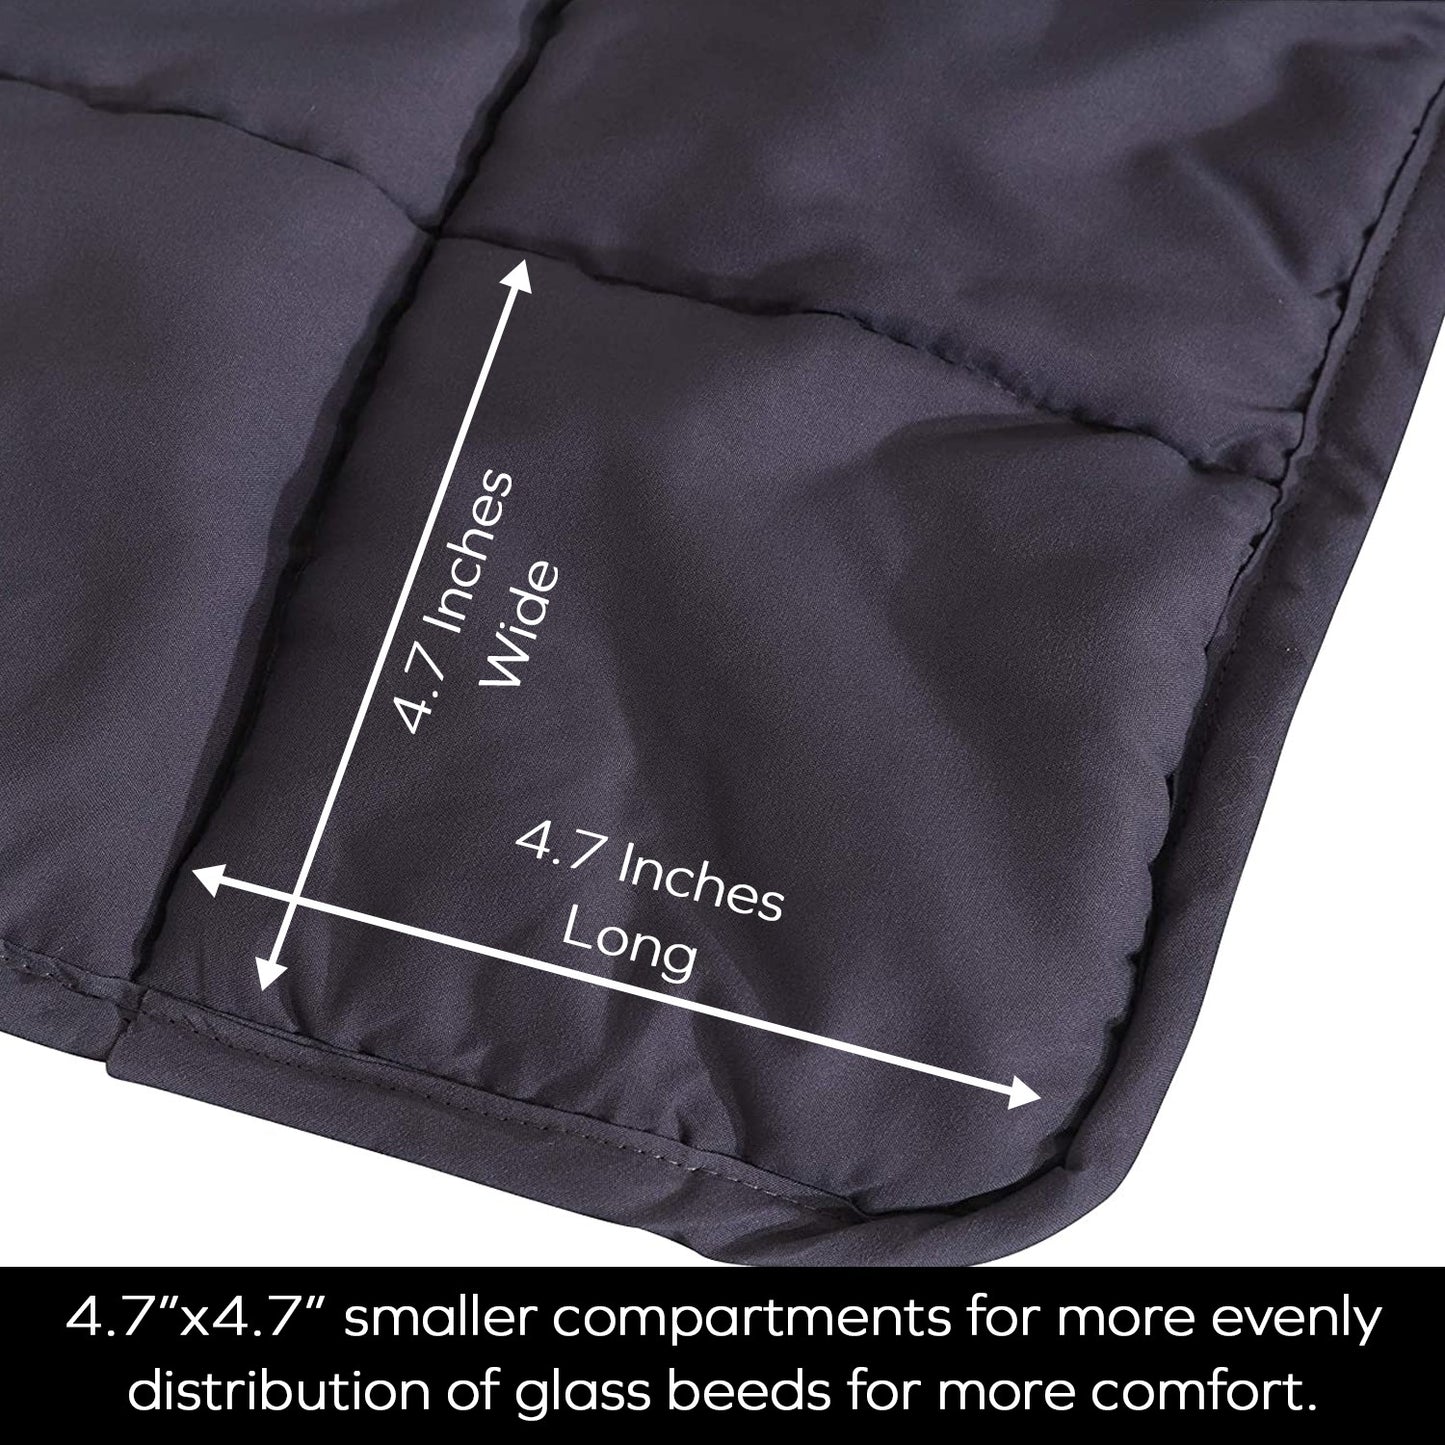 Weighted blanket 15 pound Grey inner/ Grey outer